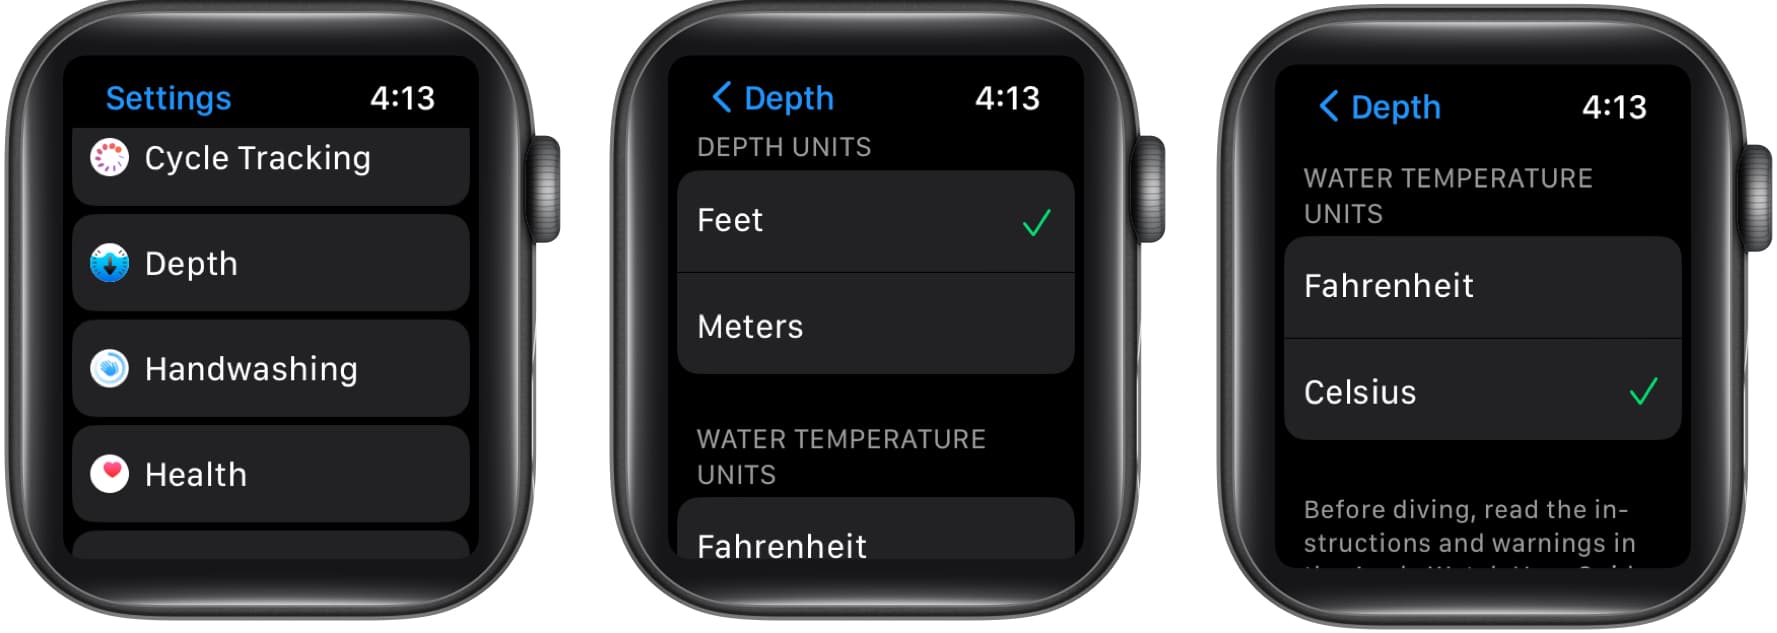 Modify temperature and depth measurements on Apple Watch Ultra